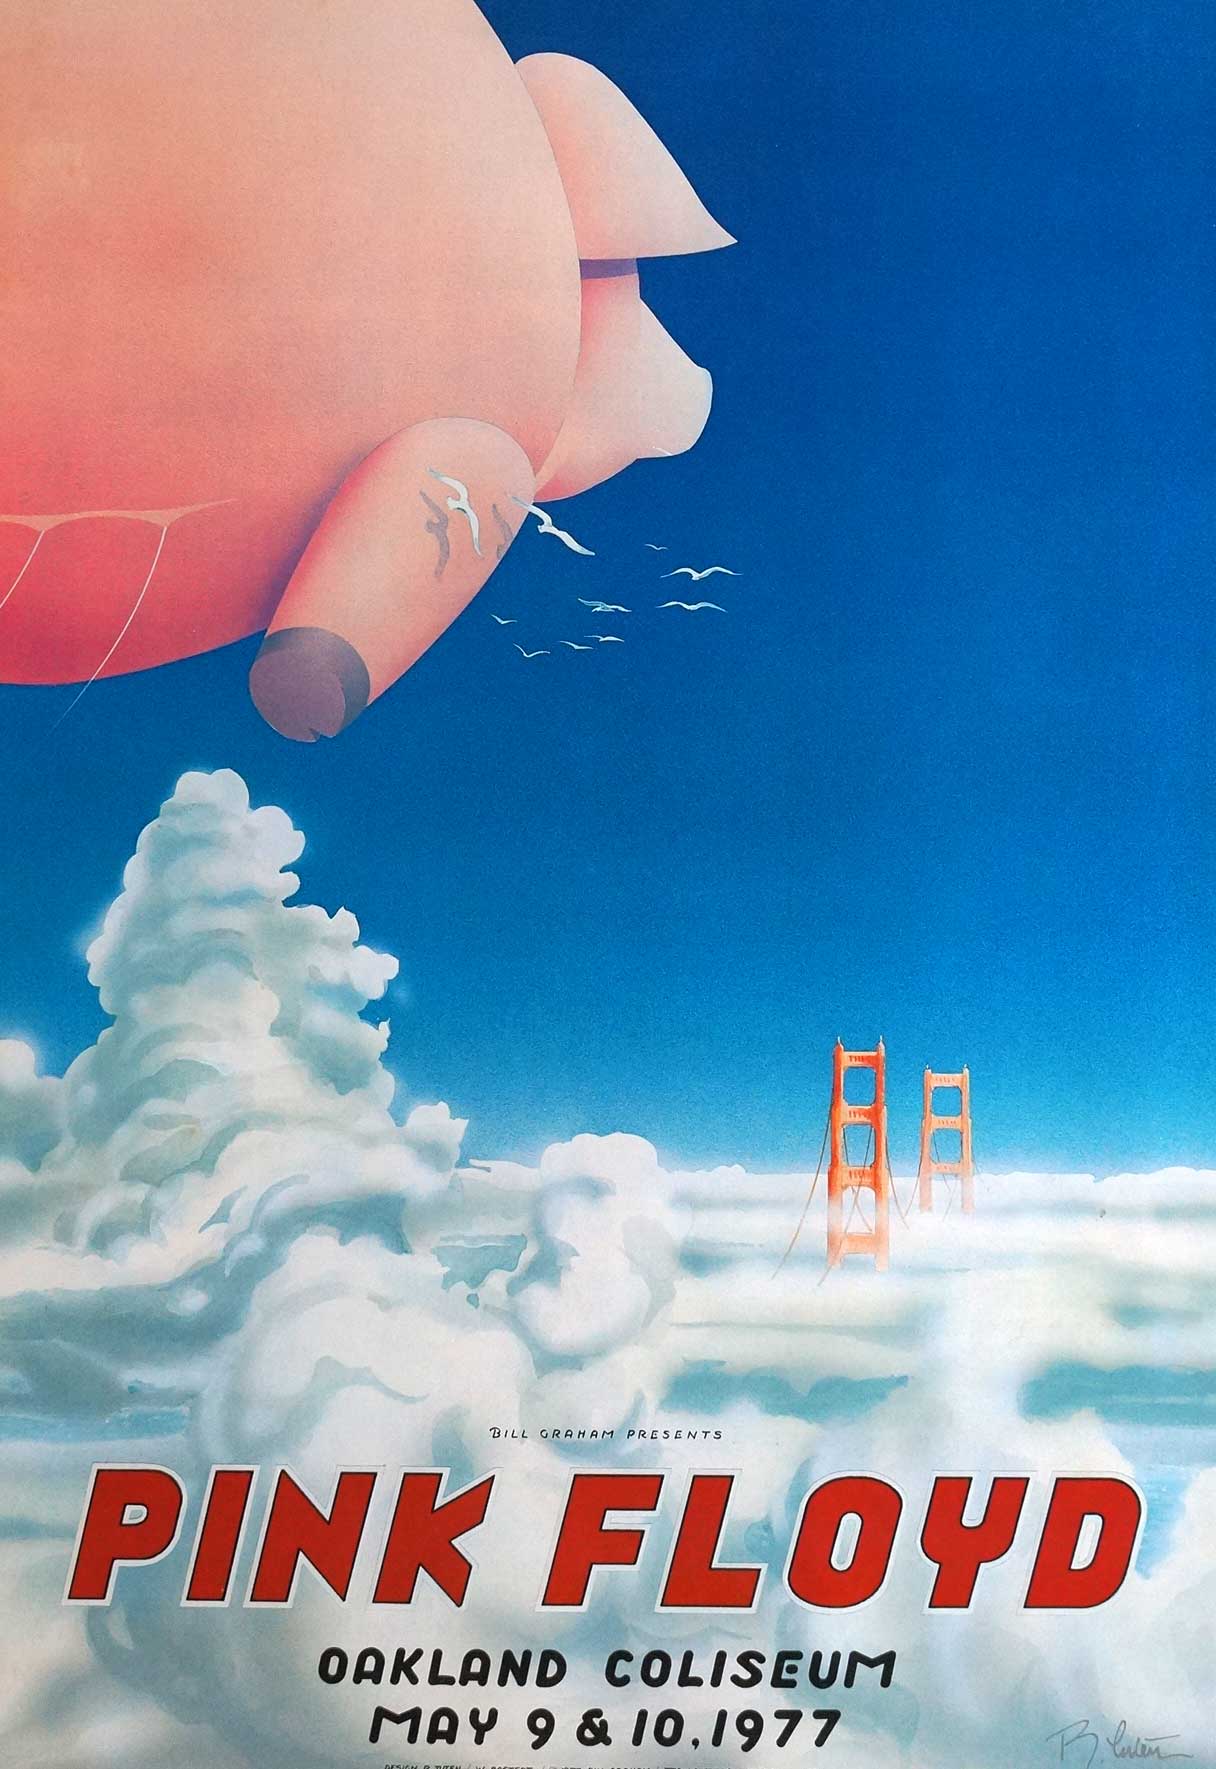 Pink Floyd at The Oakland Coliseum Movie Poster, 1977